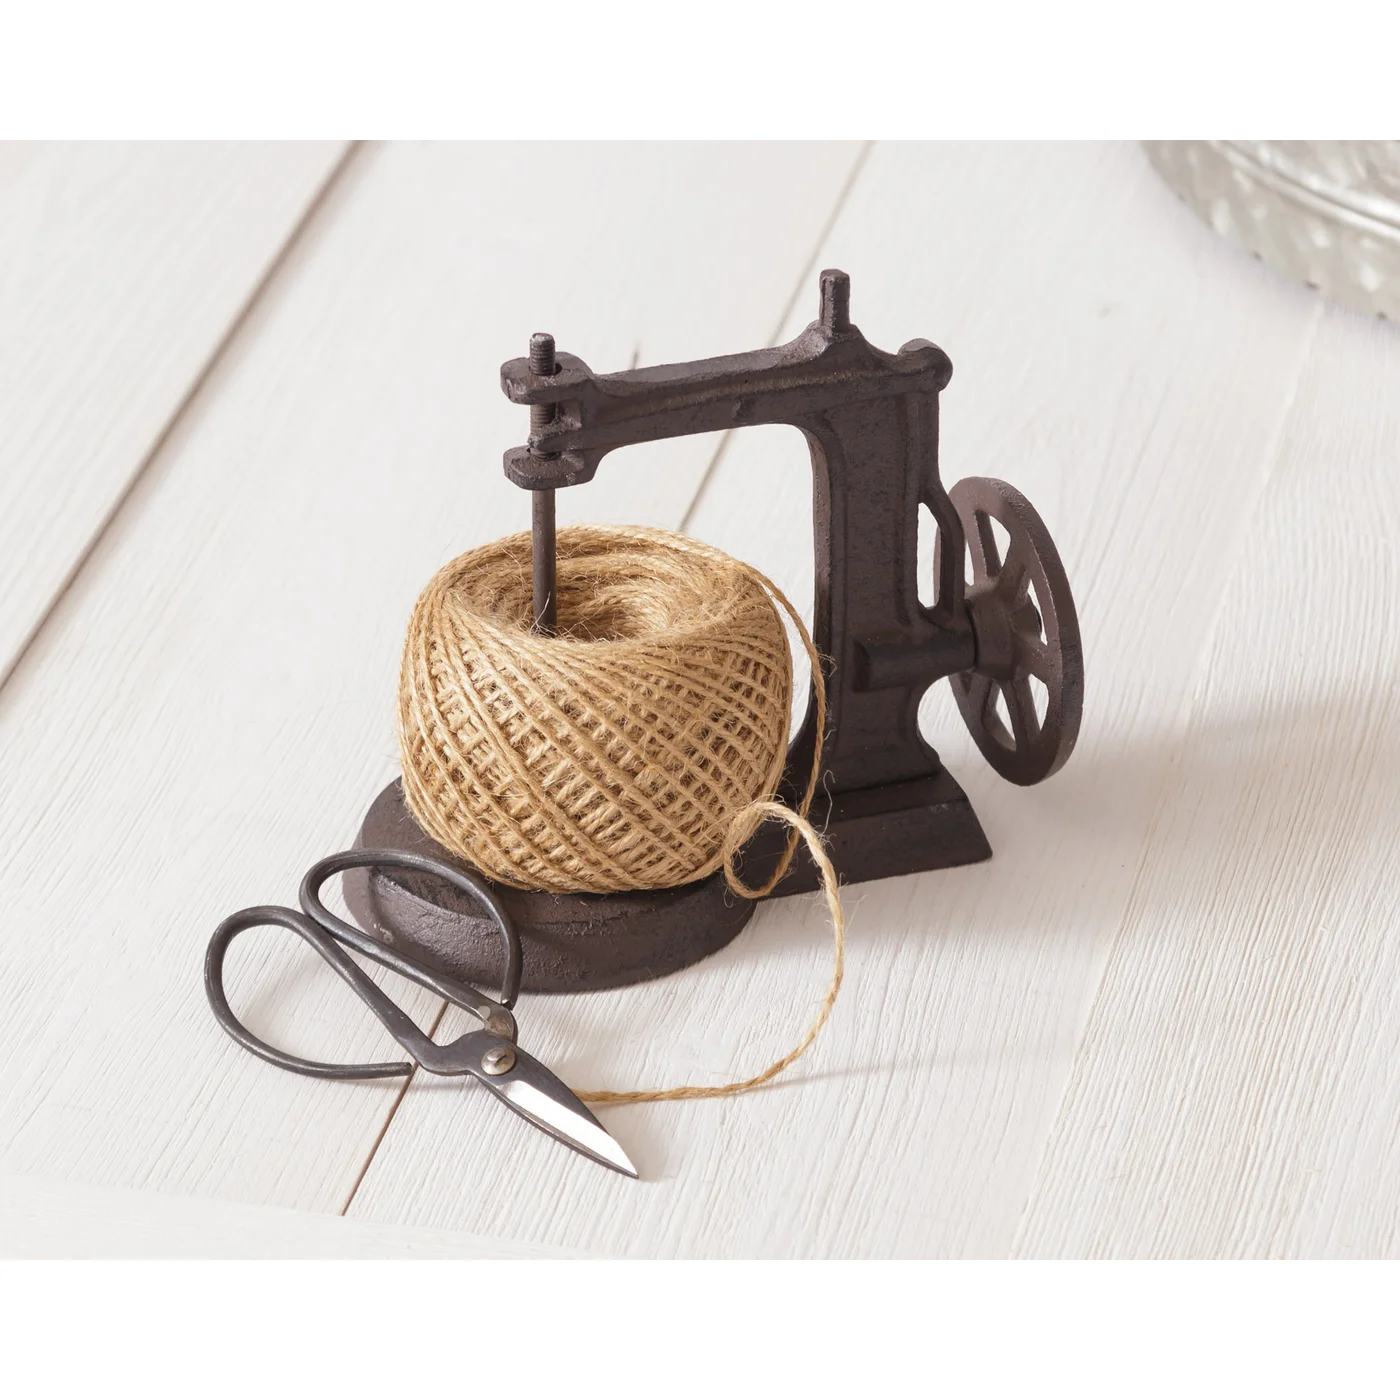 Cast Iron Sewing Machine Twine Holder with Scissors